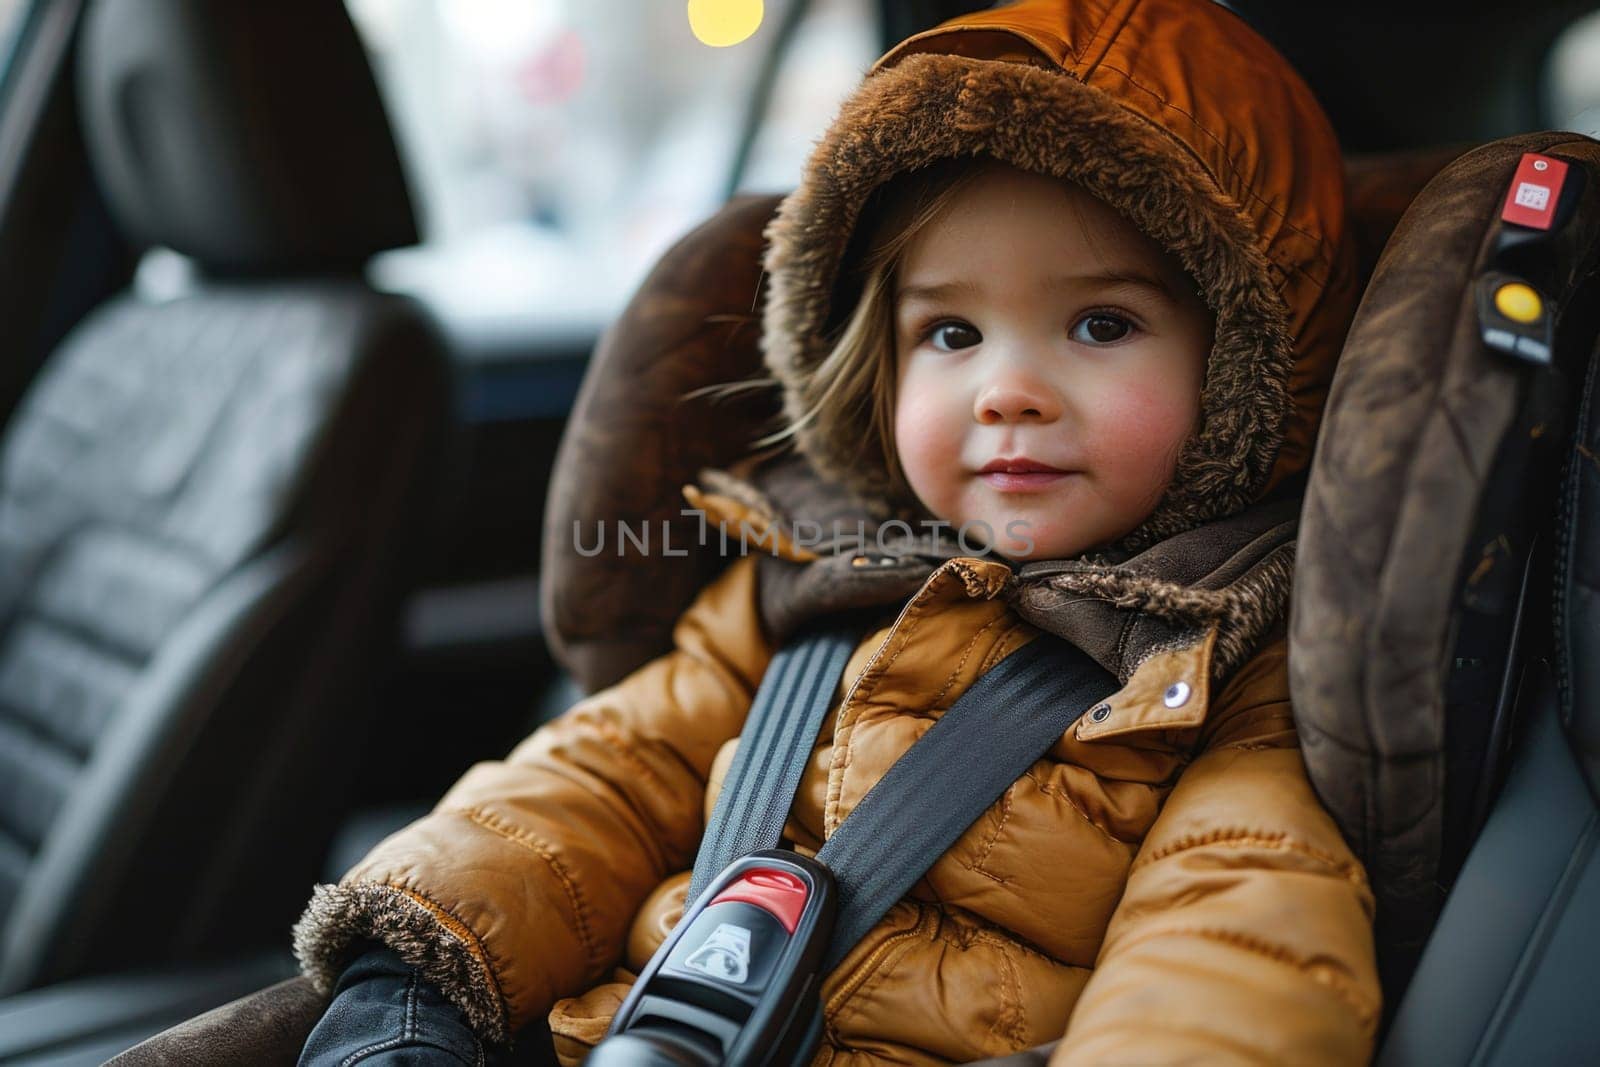 Smiling toddler strapped in a special child seat in the car, preparing for a safe and comfortable journey